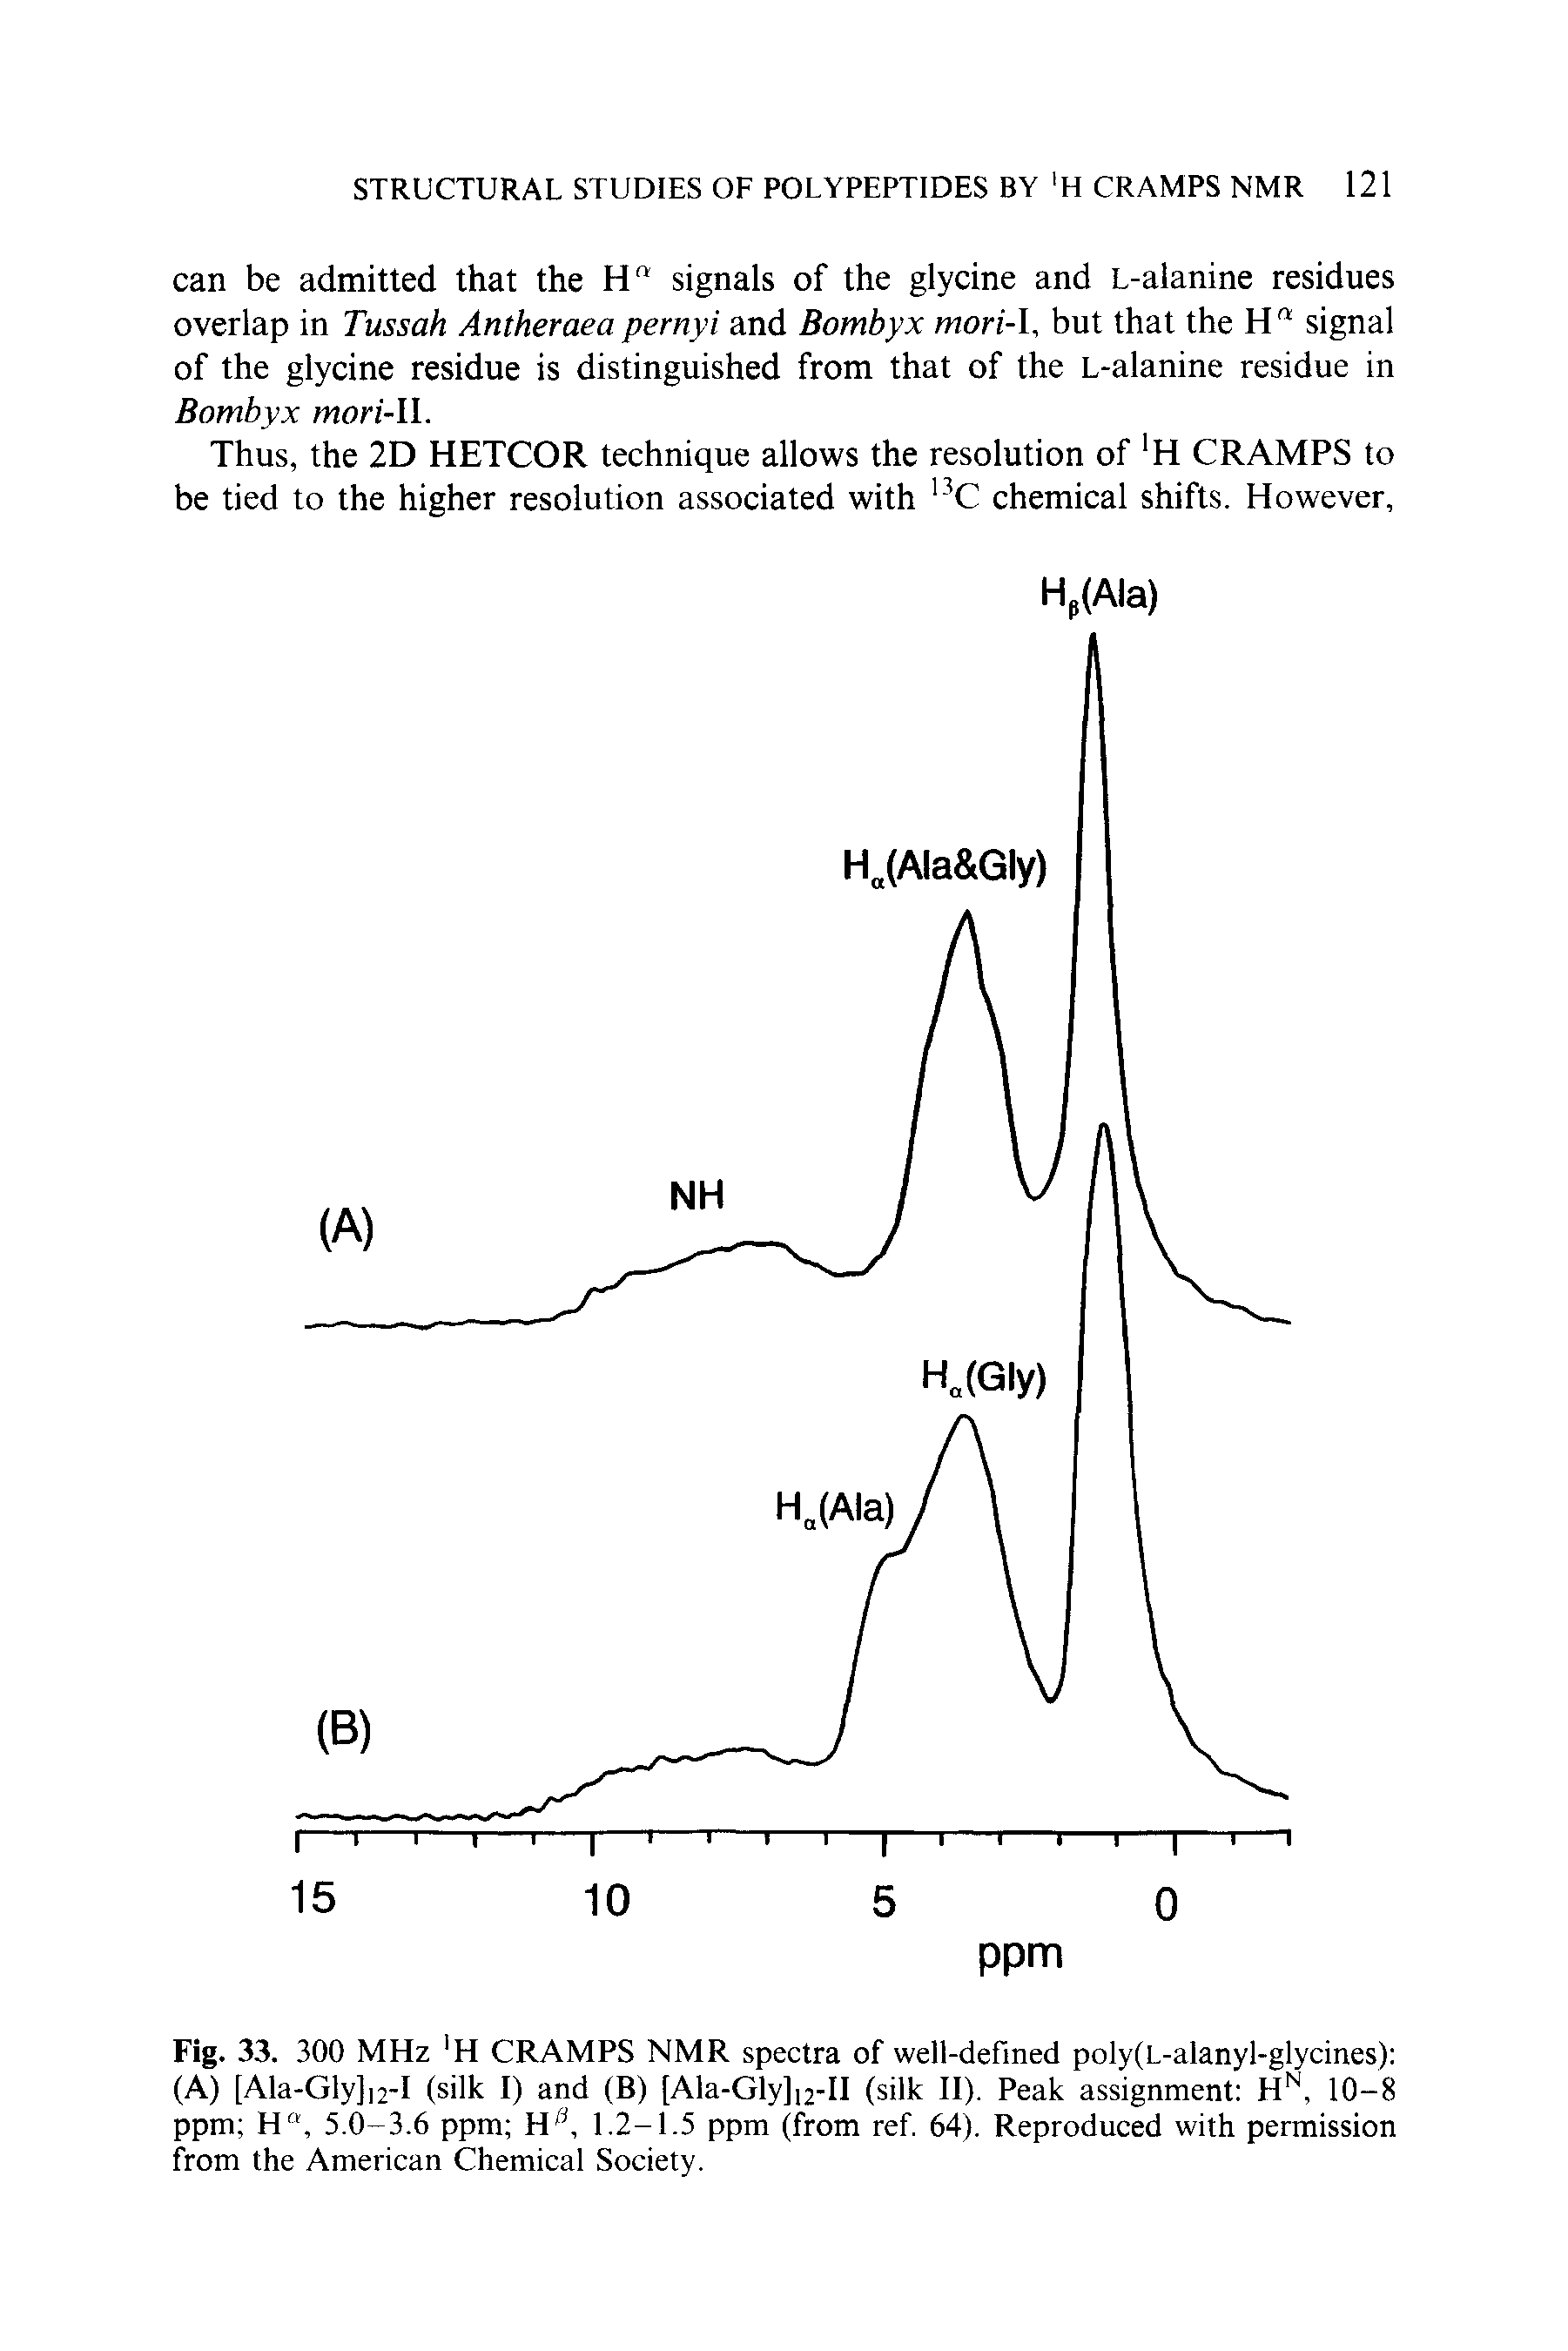 Fig. 33. 300 MHz H CRAMPS NMR spectra of well-defined polyfI.-alanyl-glycines) (A) [Ala-Gly]i2-I (silk I) and (B) [Ala-Gly]i2-II (silk II). Peak assignment H, 10-8 ppm H", 5.0-3.6 ppm H 1.2-1.5 ppm (from ref. 64). Reproduced with permission from the American Chemical Society.